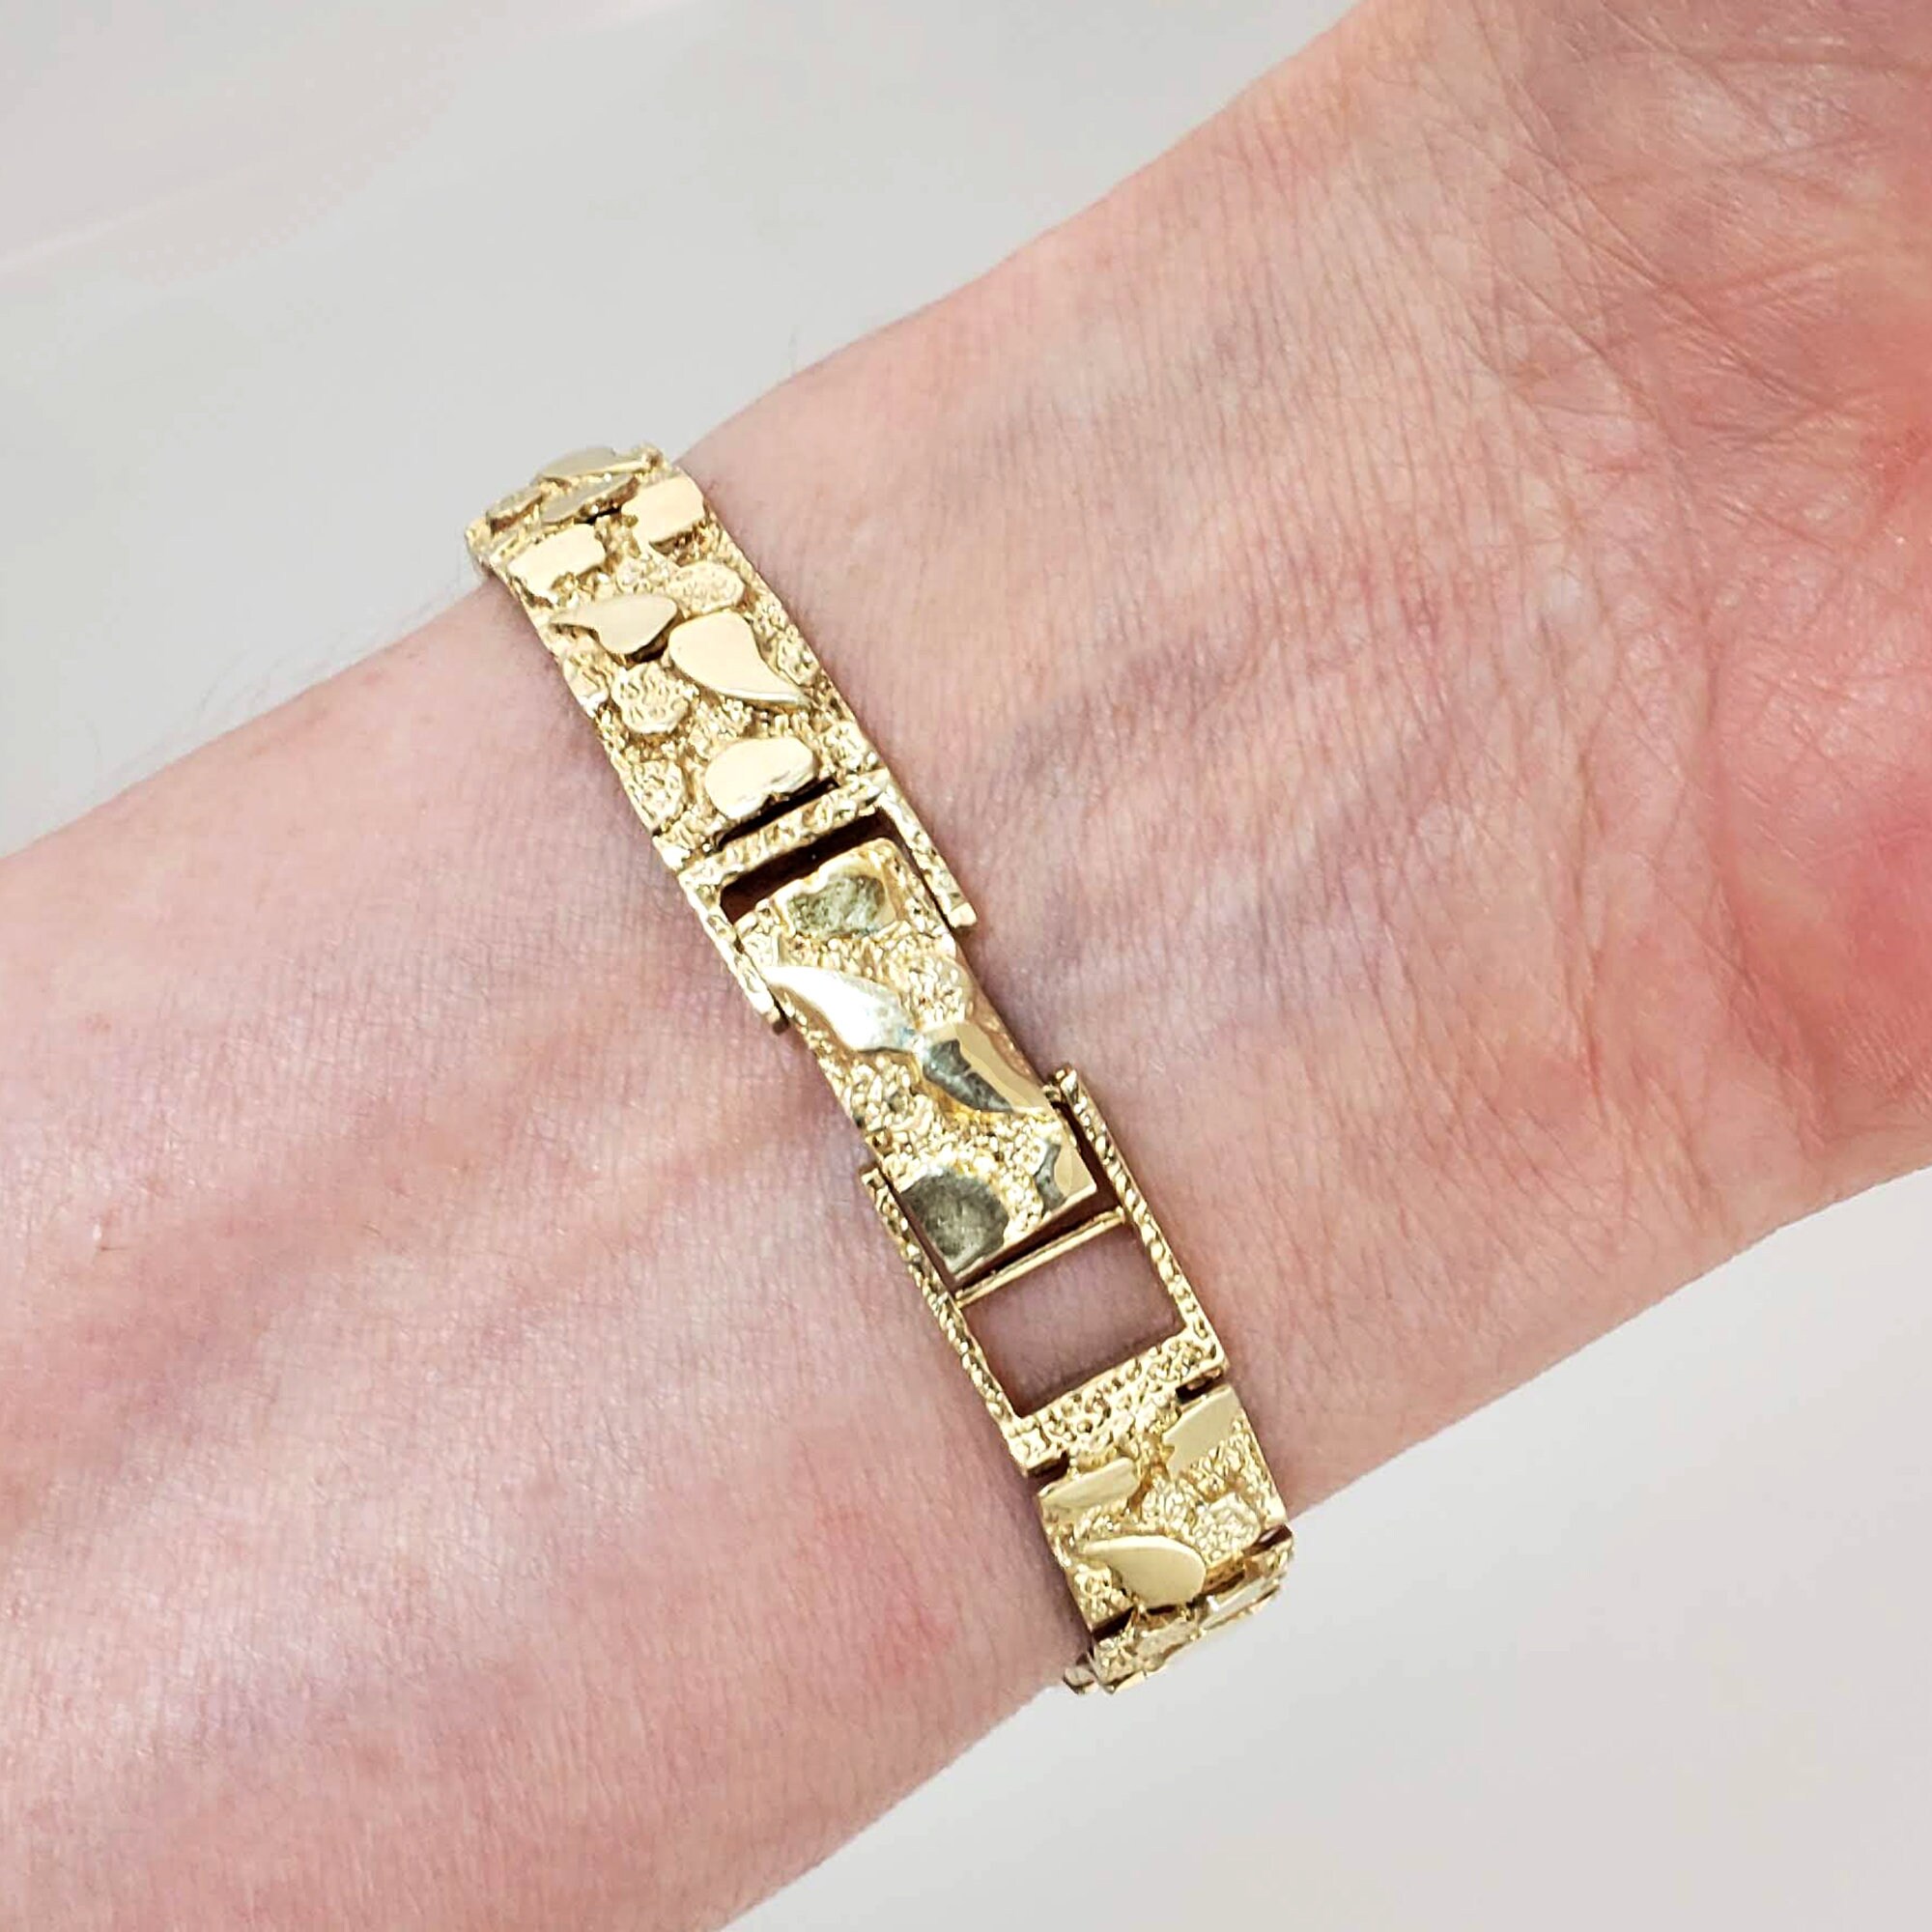 10K Solid Yellow Gold Nugget Bracelet 7.5” | Nugget bracelet, Gold nugget,  Gold